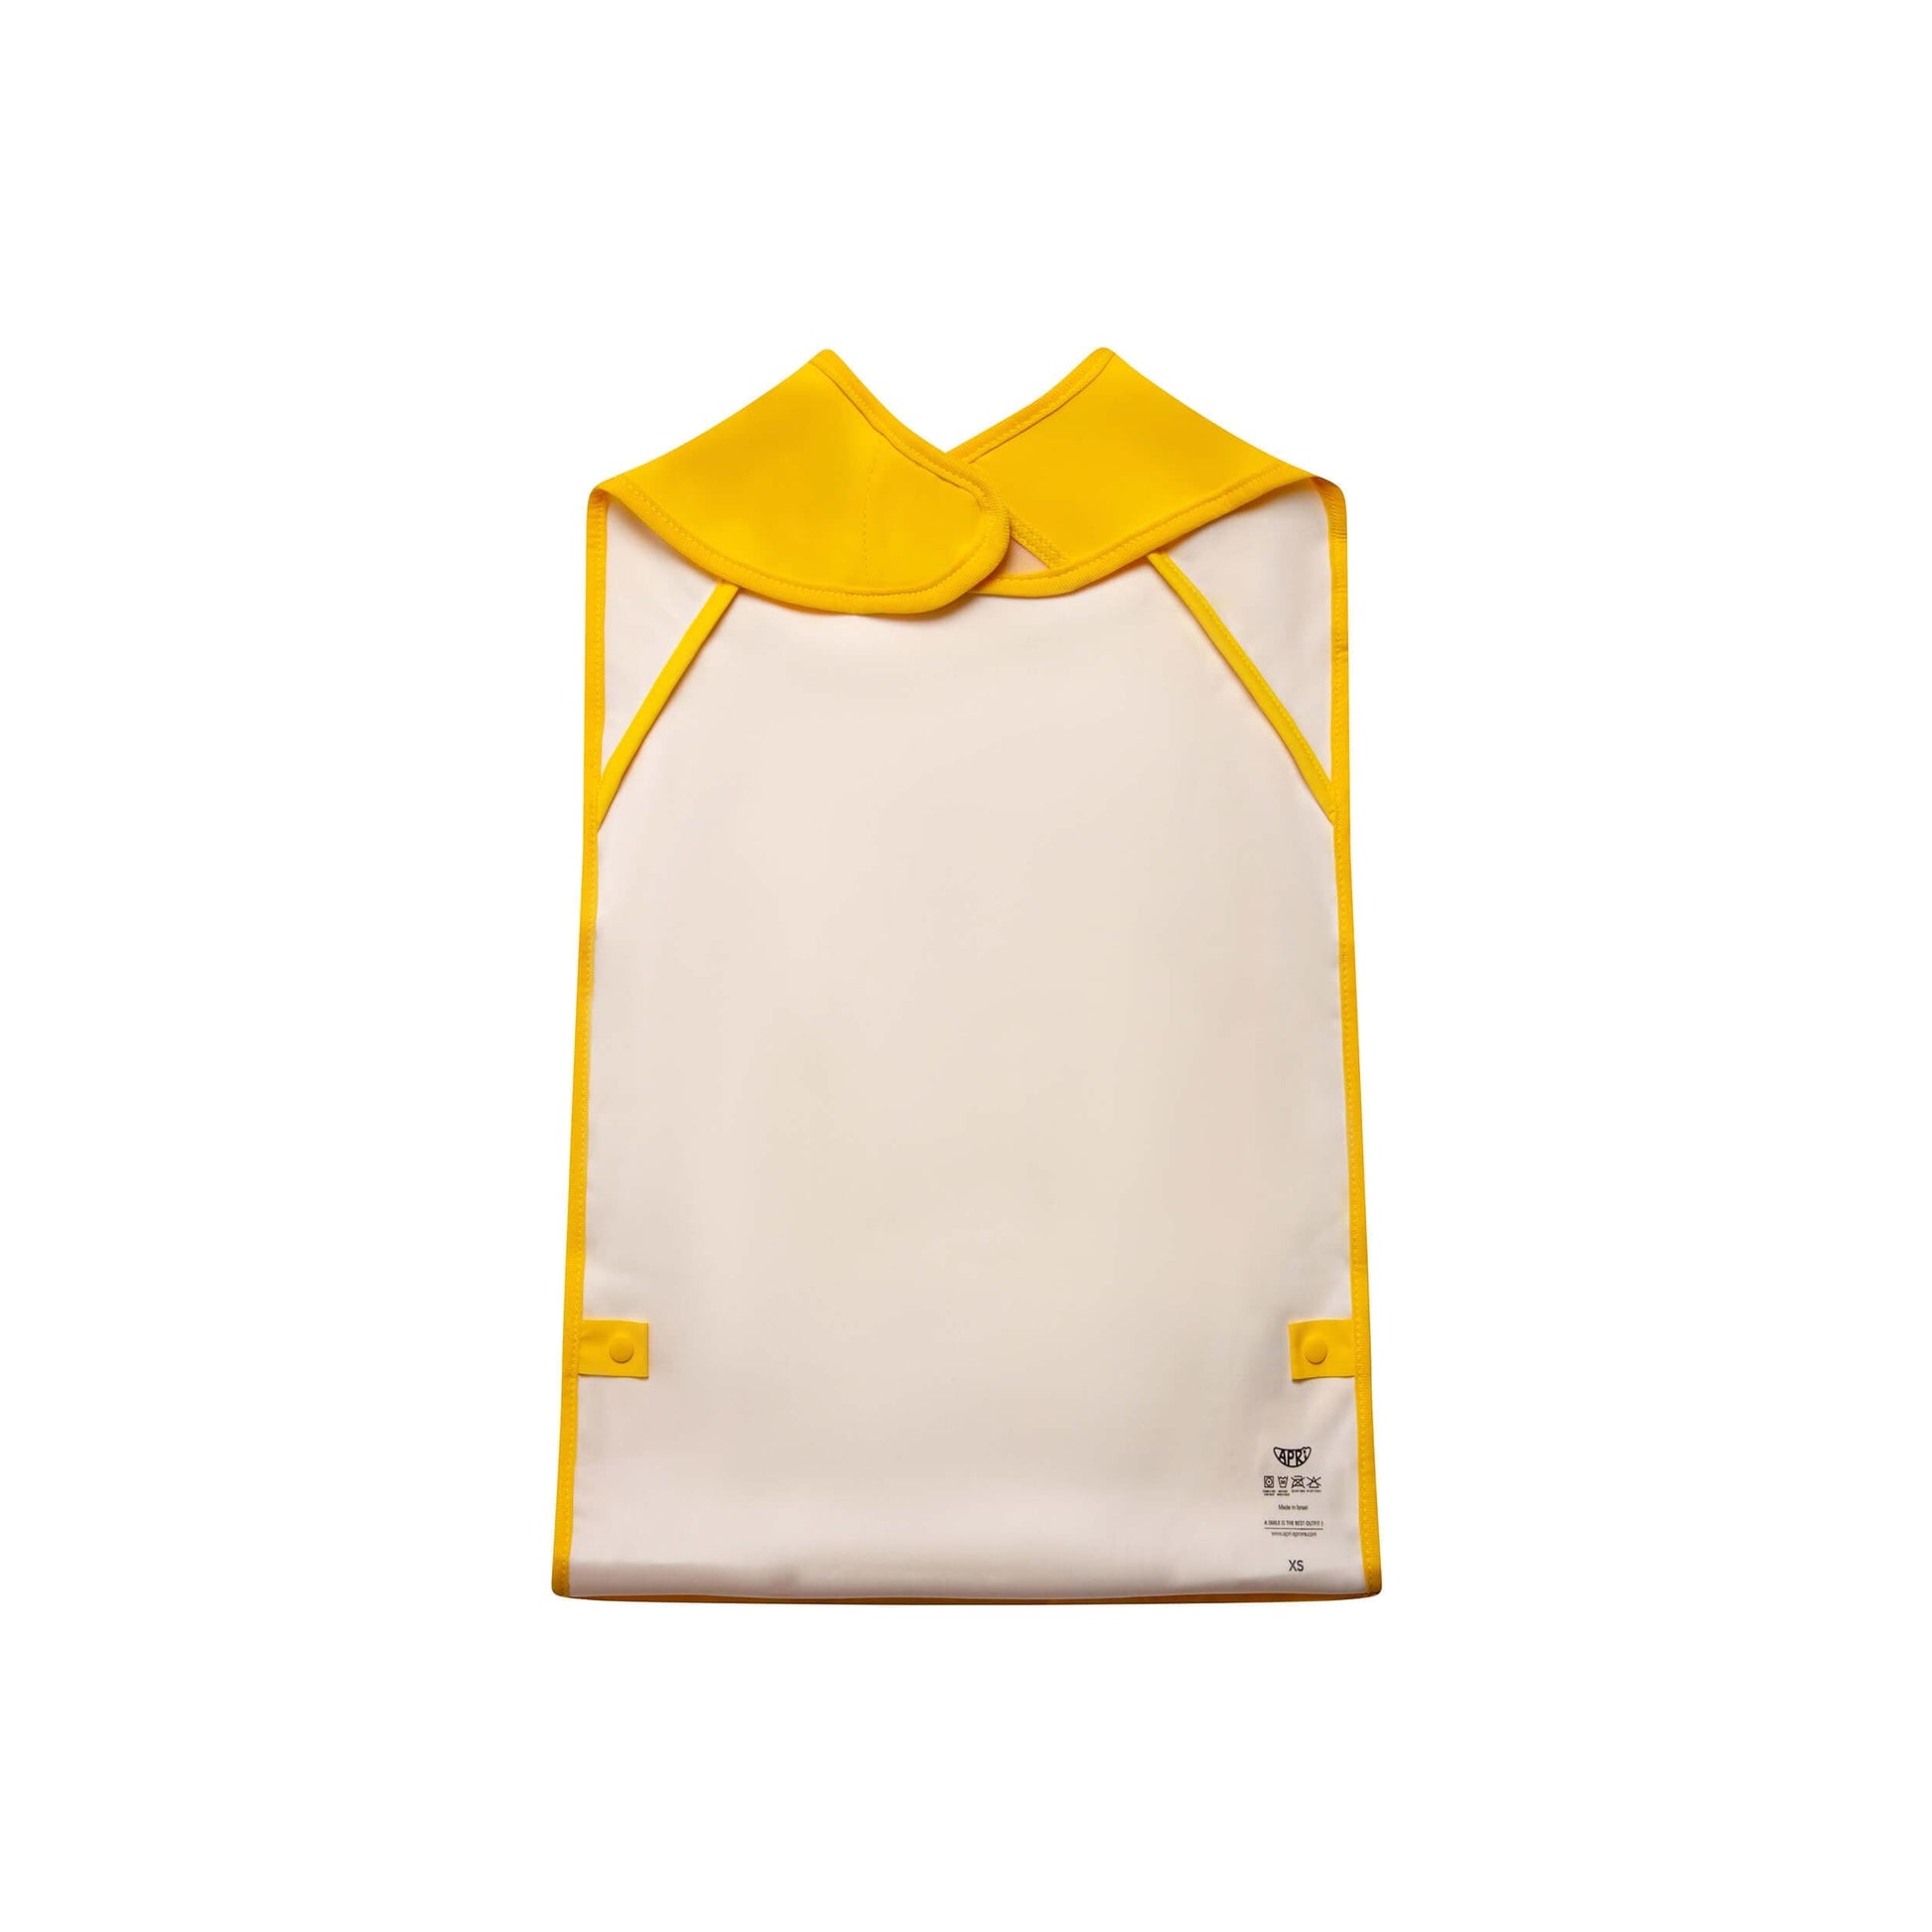 Apri waterproof bibs: Sunshine yellow, sleeveless for kids, teens, and adults. Features a food pocket, innovative fastener, and cute monster graphic